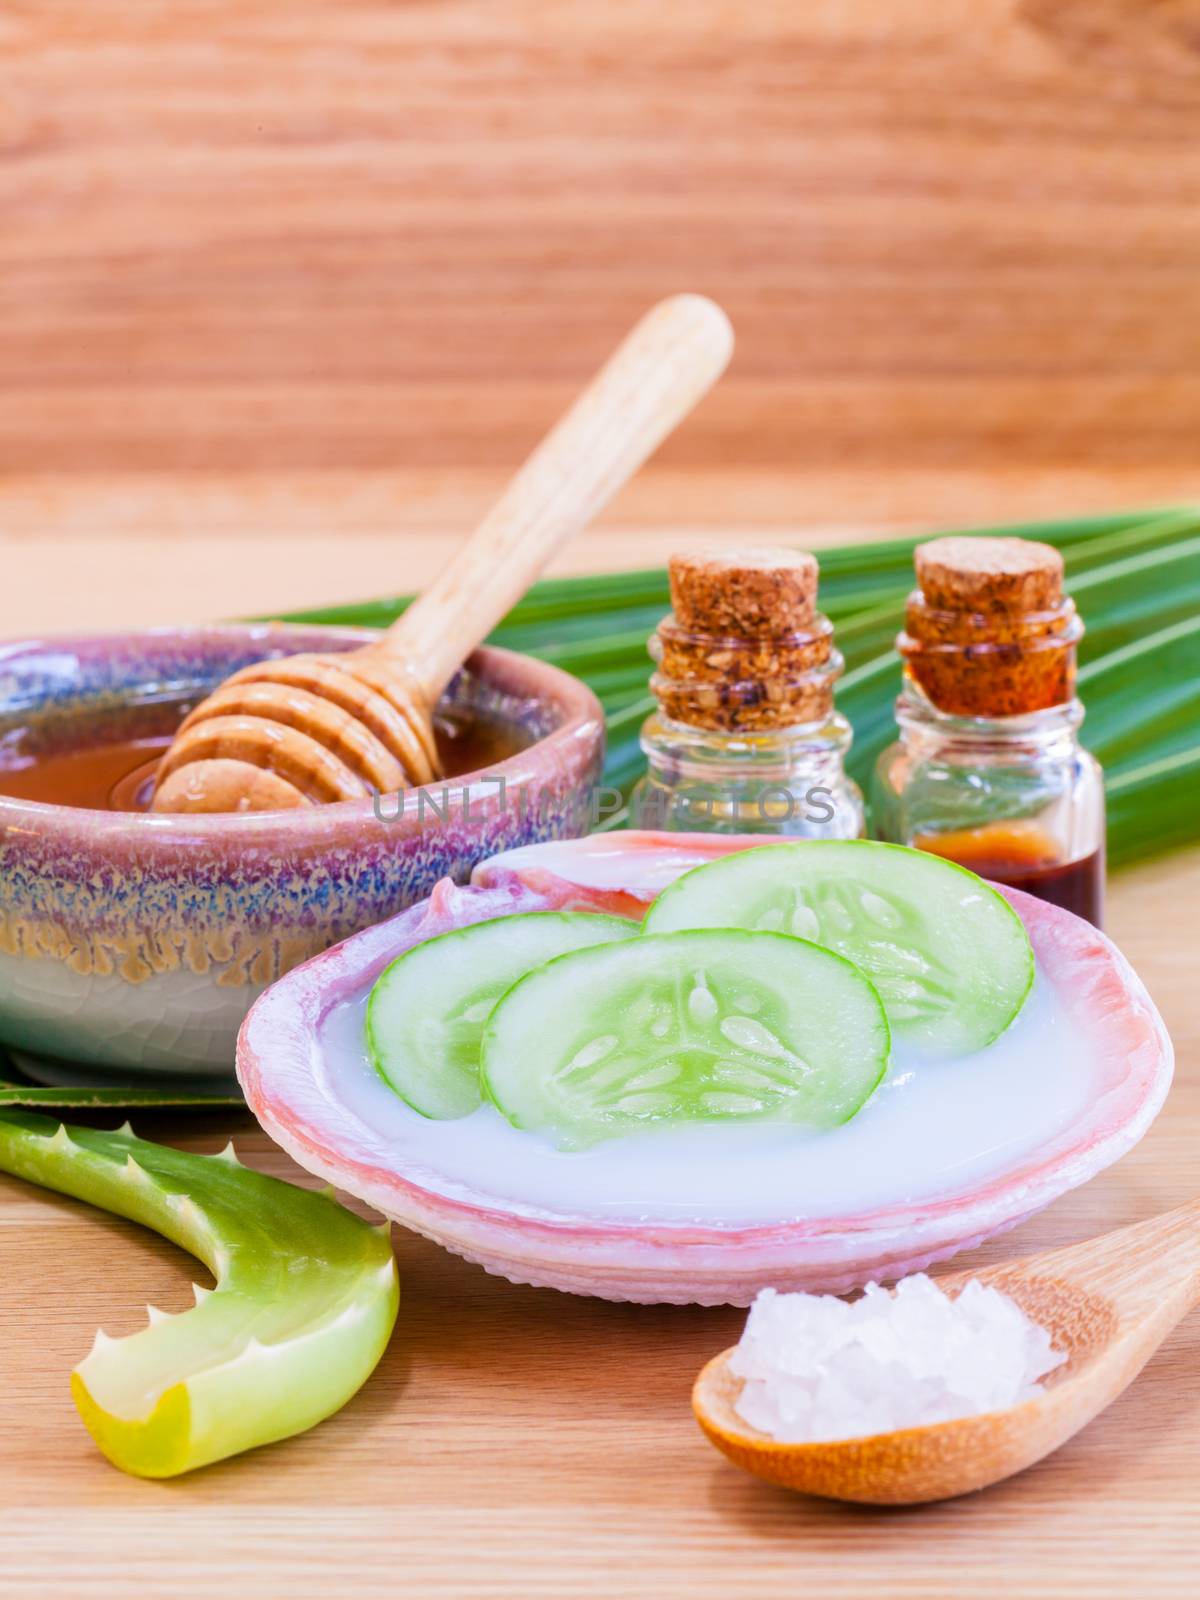 Natural Spa Ingredients . - Homemade facial masks with natural ingredients on wooden table.